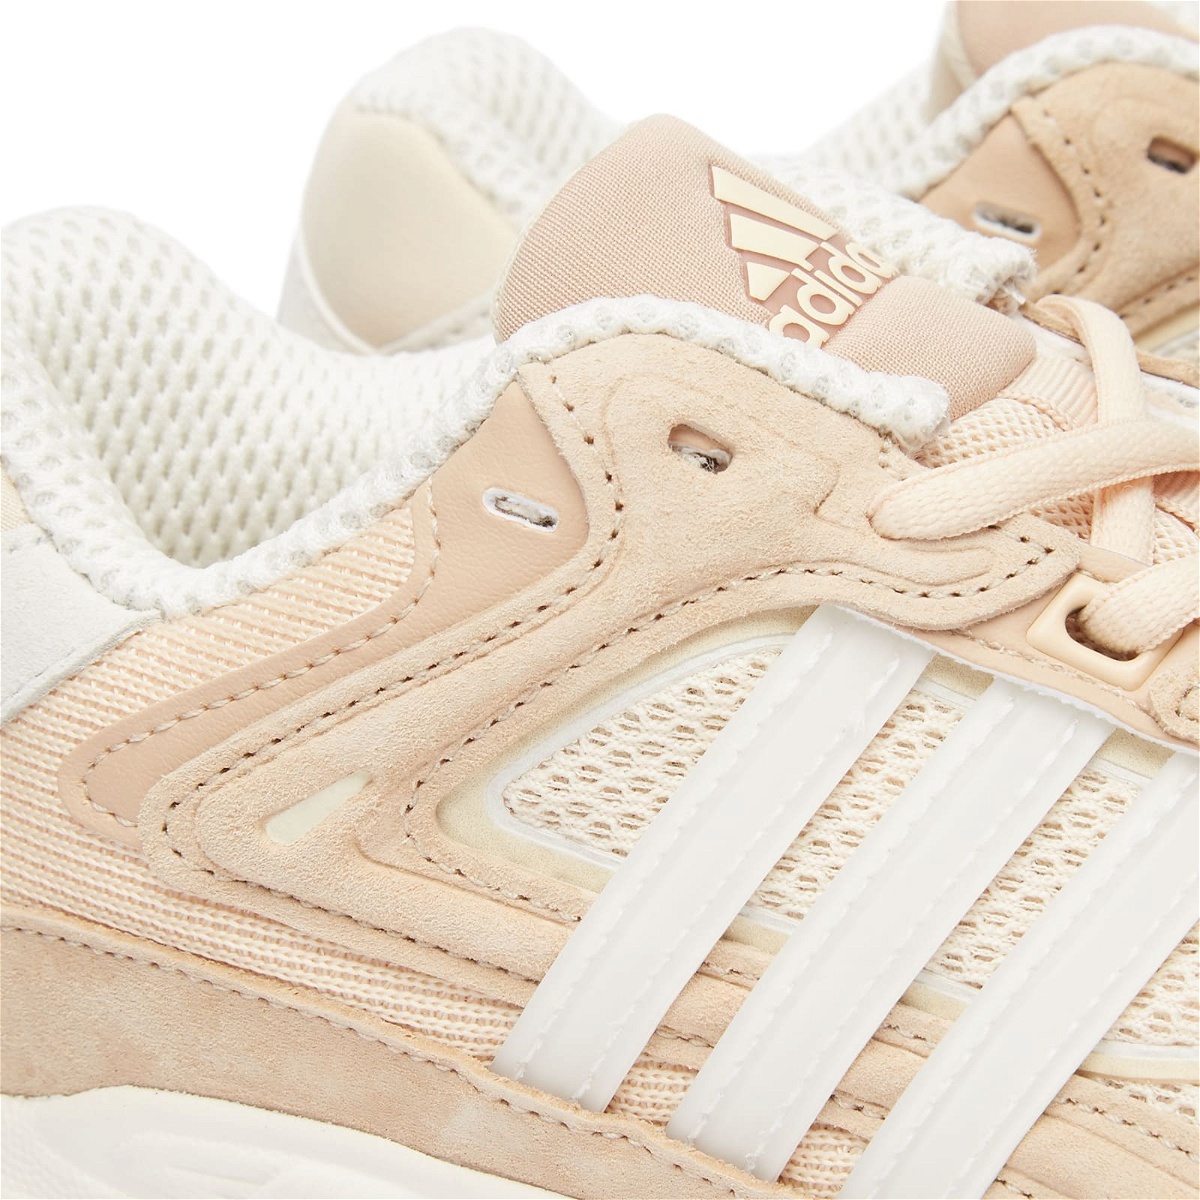 Adidas Response CL adidas White/Beige in Sneakers Sand/Off